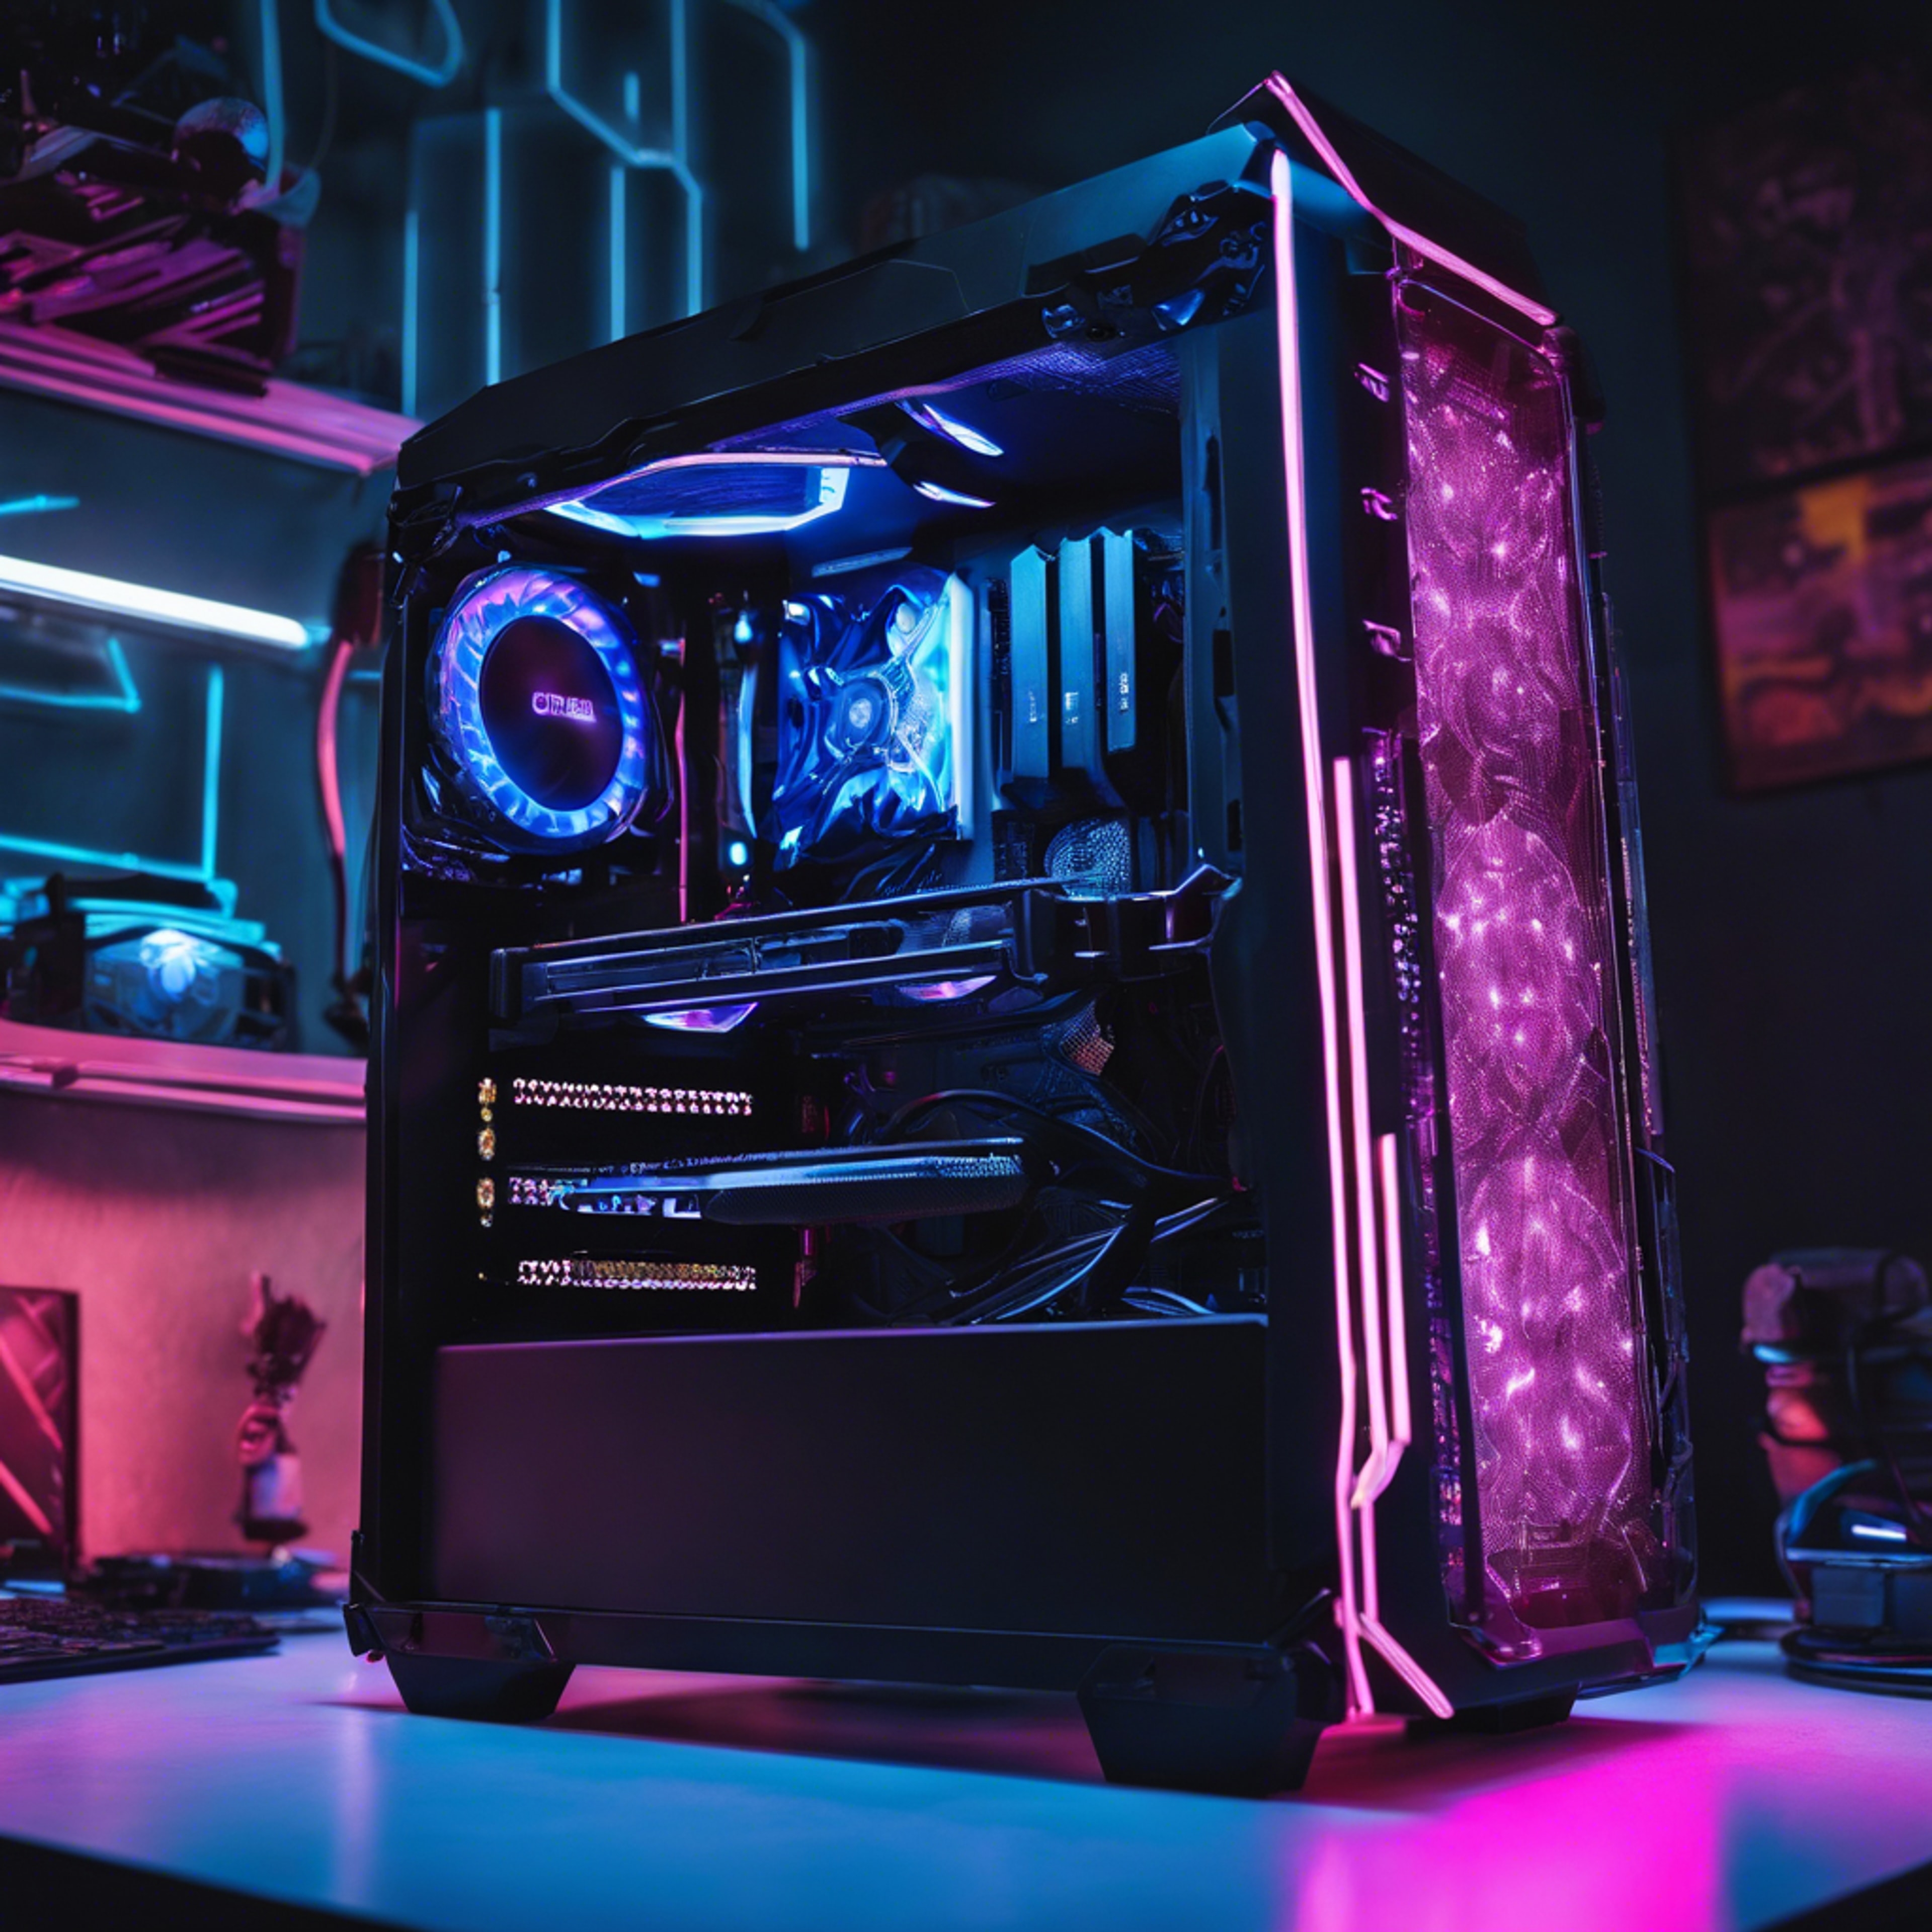 A cyberpunk-style black gaming PC with neon blue LED lights. 墙纸[4f1d7ee7161d4e2894f4]